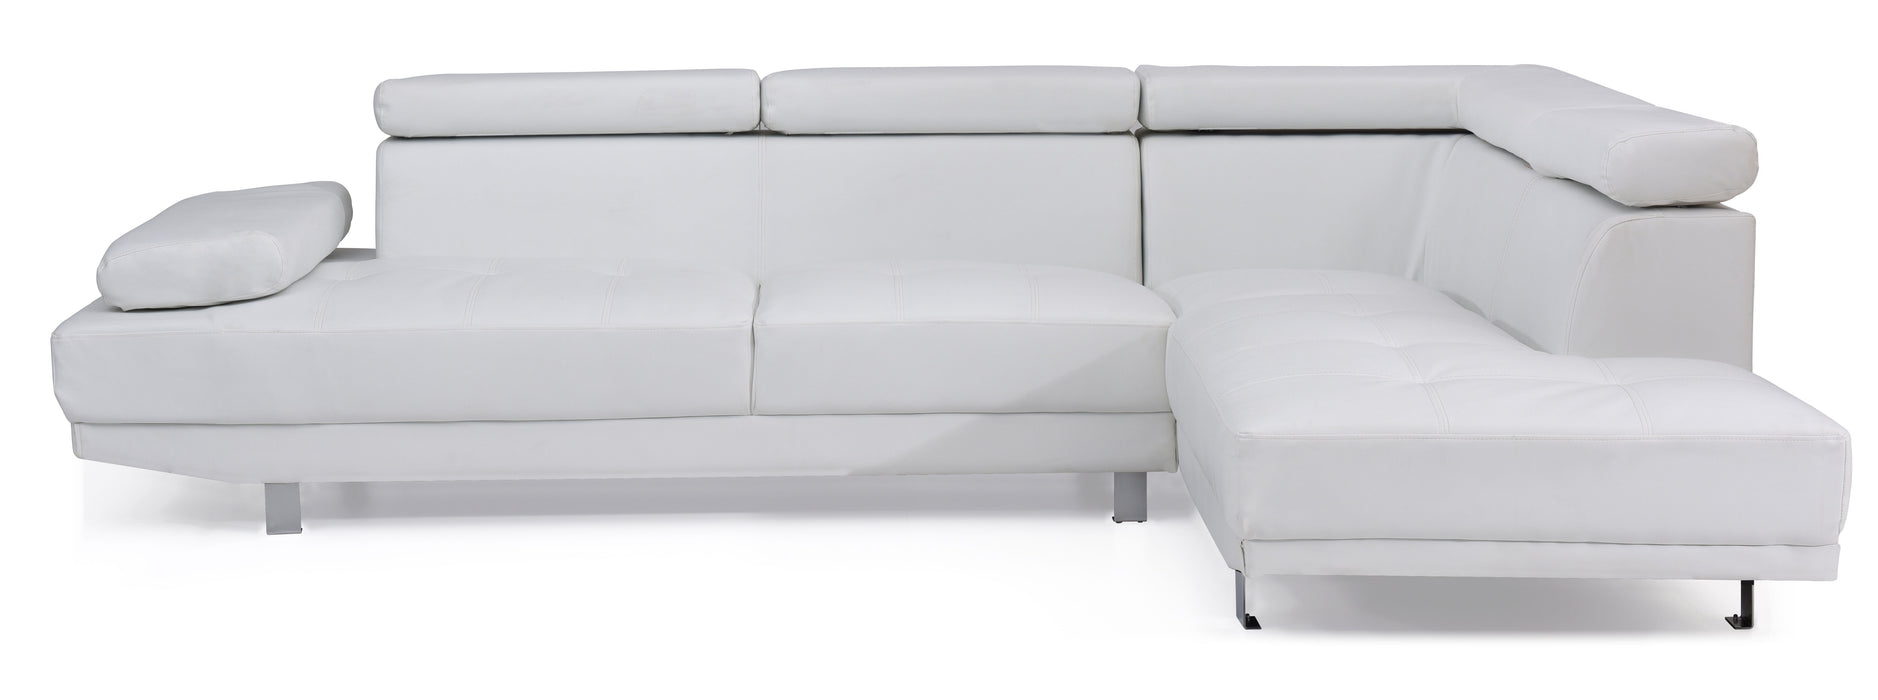 Glory Furniture Riveredge Sectional (2 Boxes), White